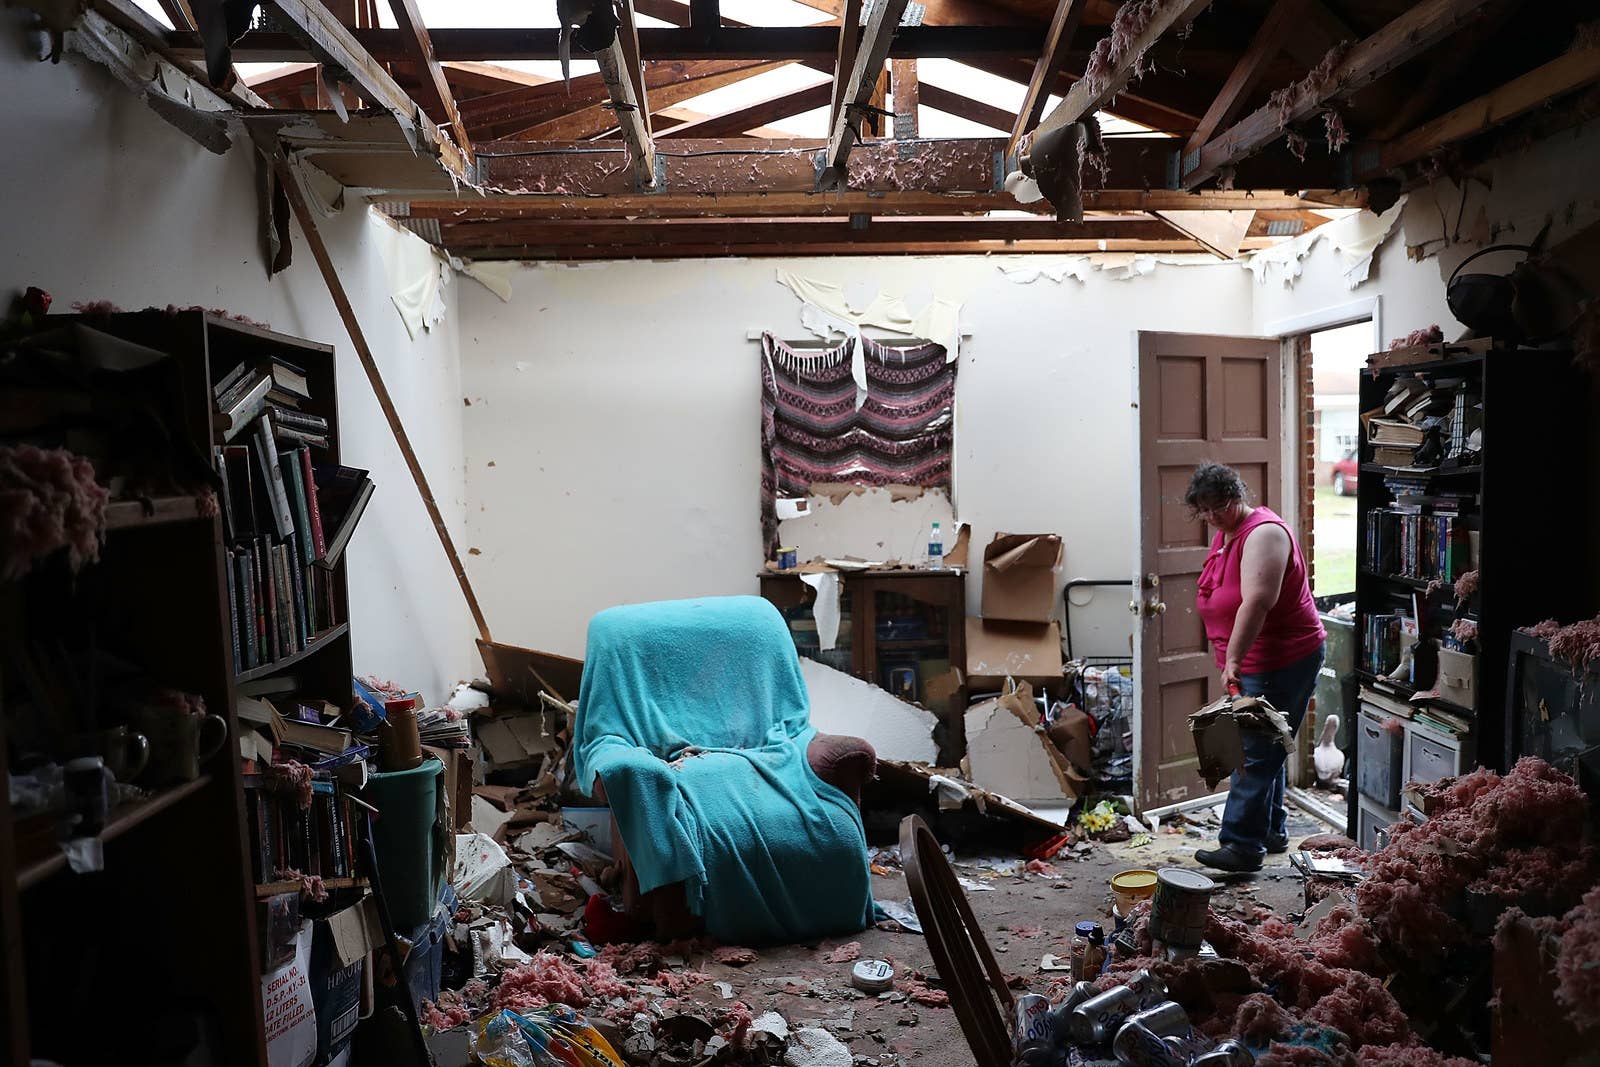 Amanda Logsdon begins the process of trying to clean up her home after its roof was blown off by Hurricane Michael on Oct. 11 in Panama City.